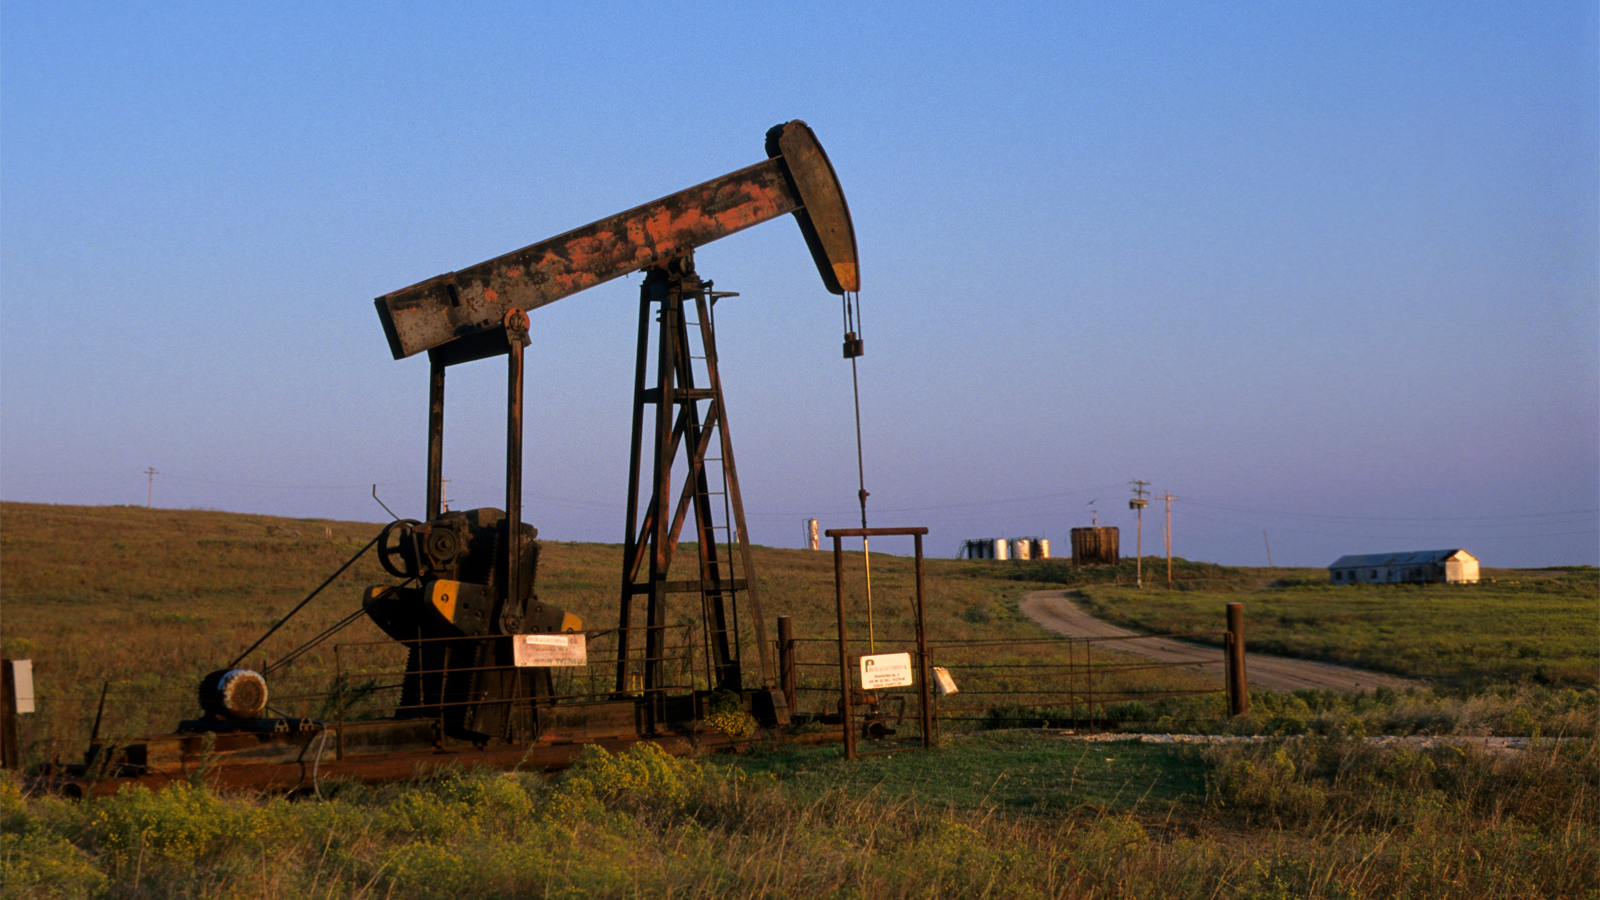 Rusted oil well in Oklahoma